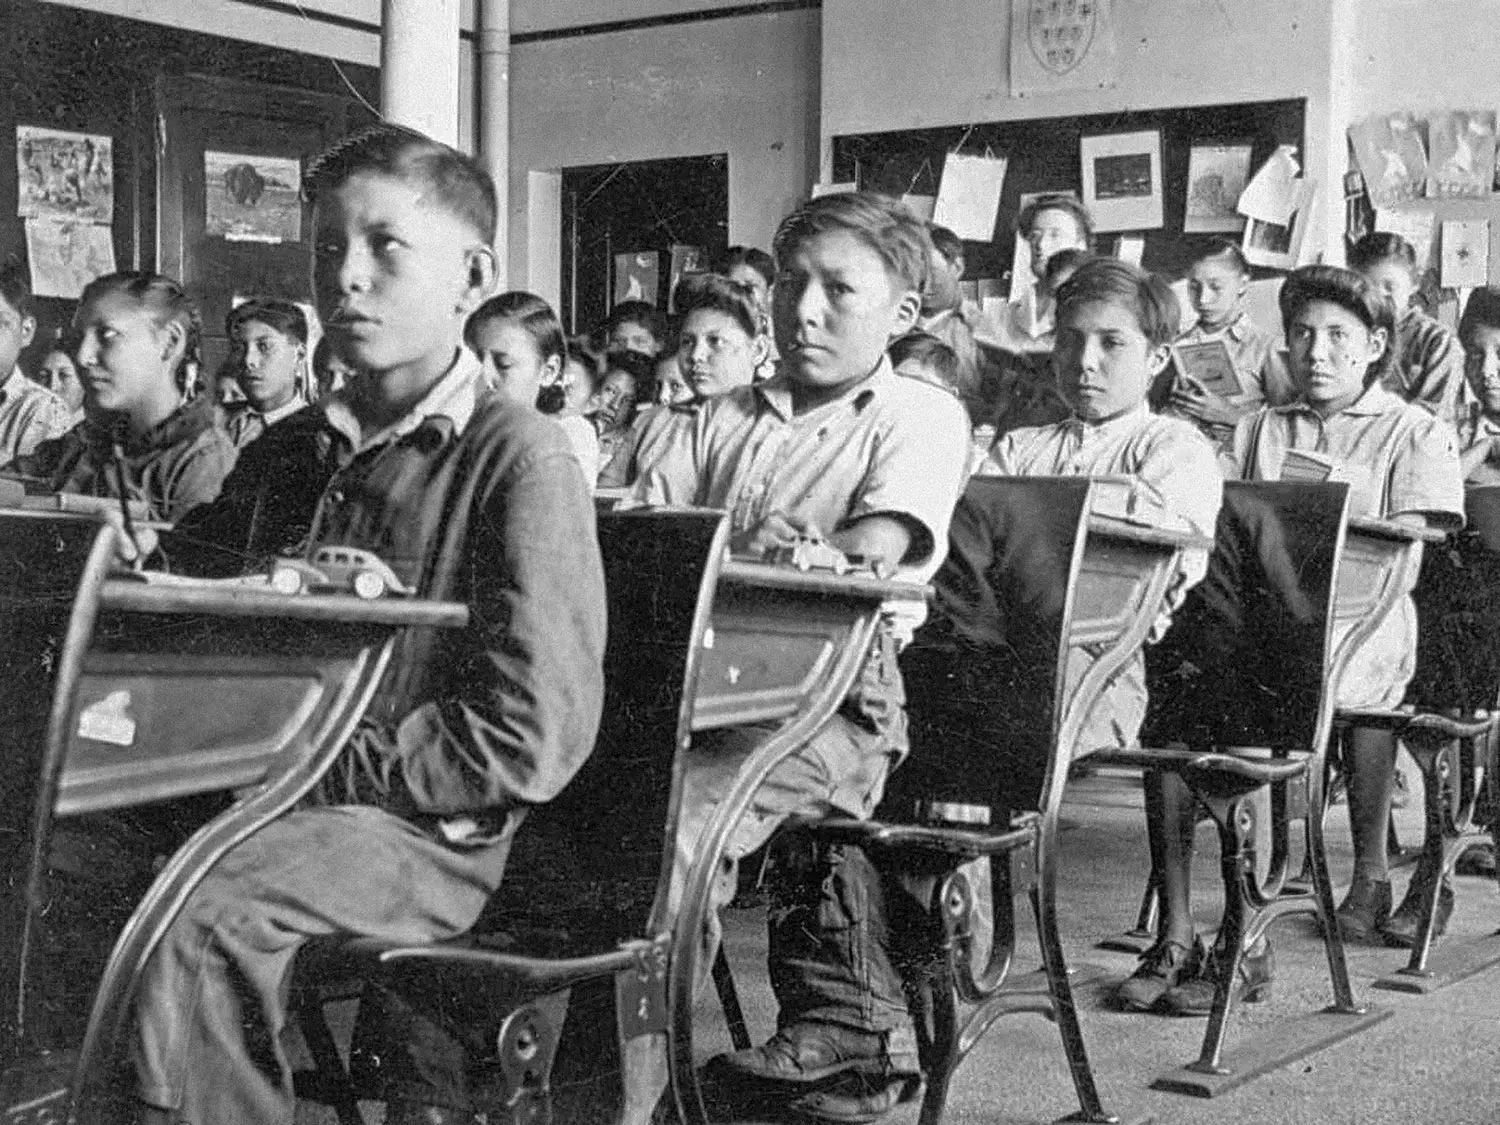 Rows of elementary school students sit in a packed classroom.